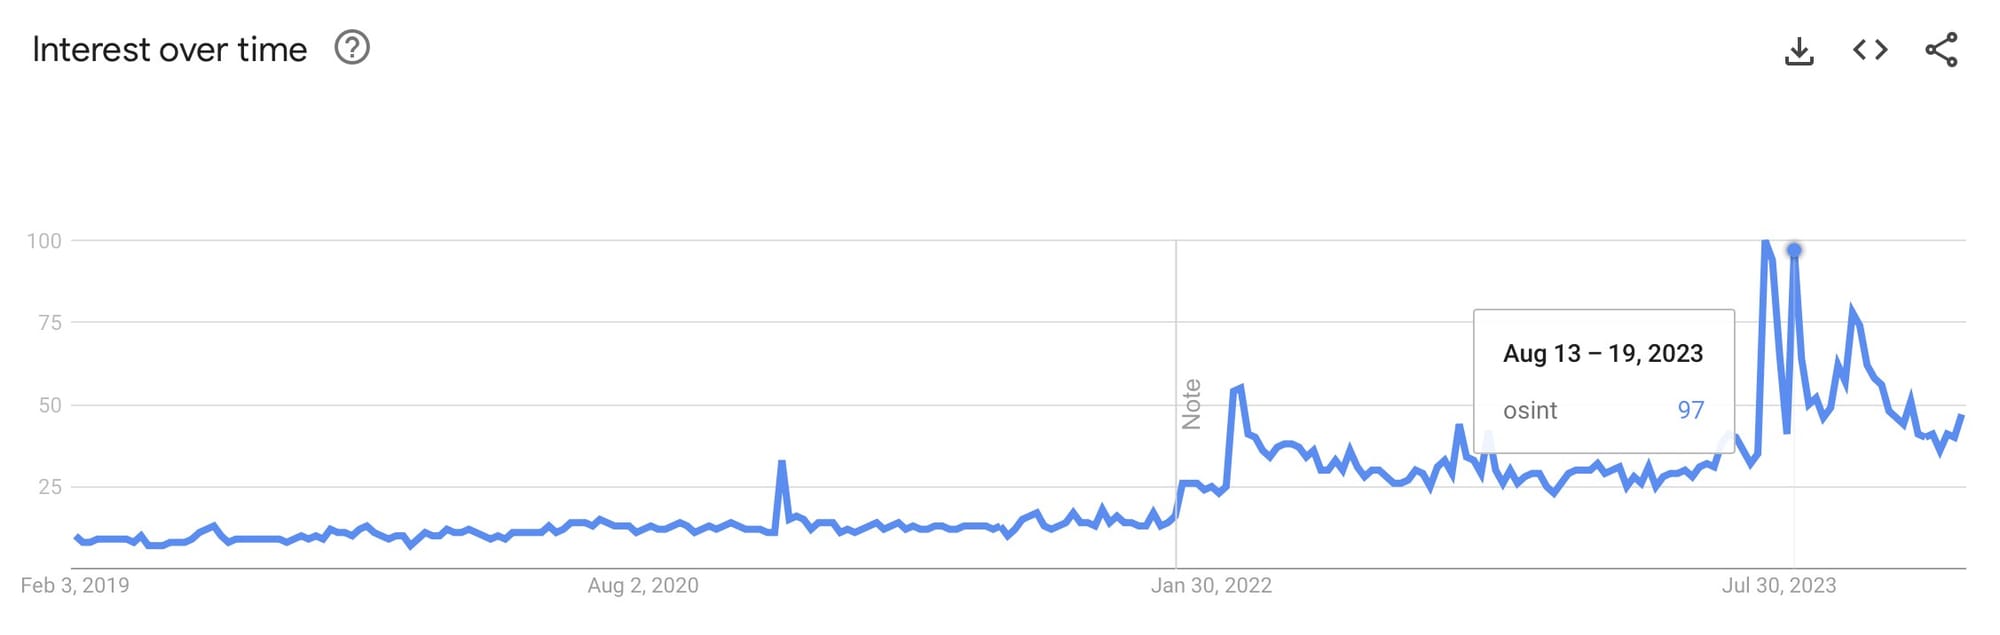 Popularity of OSINT topic over time. Source: Google Trends.